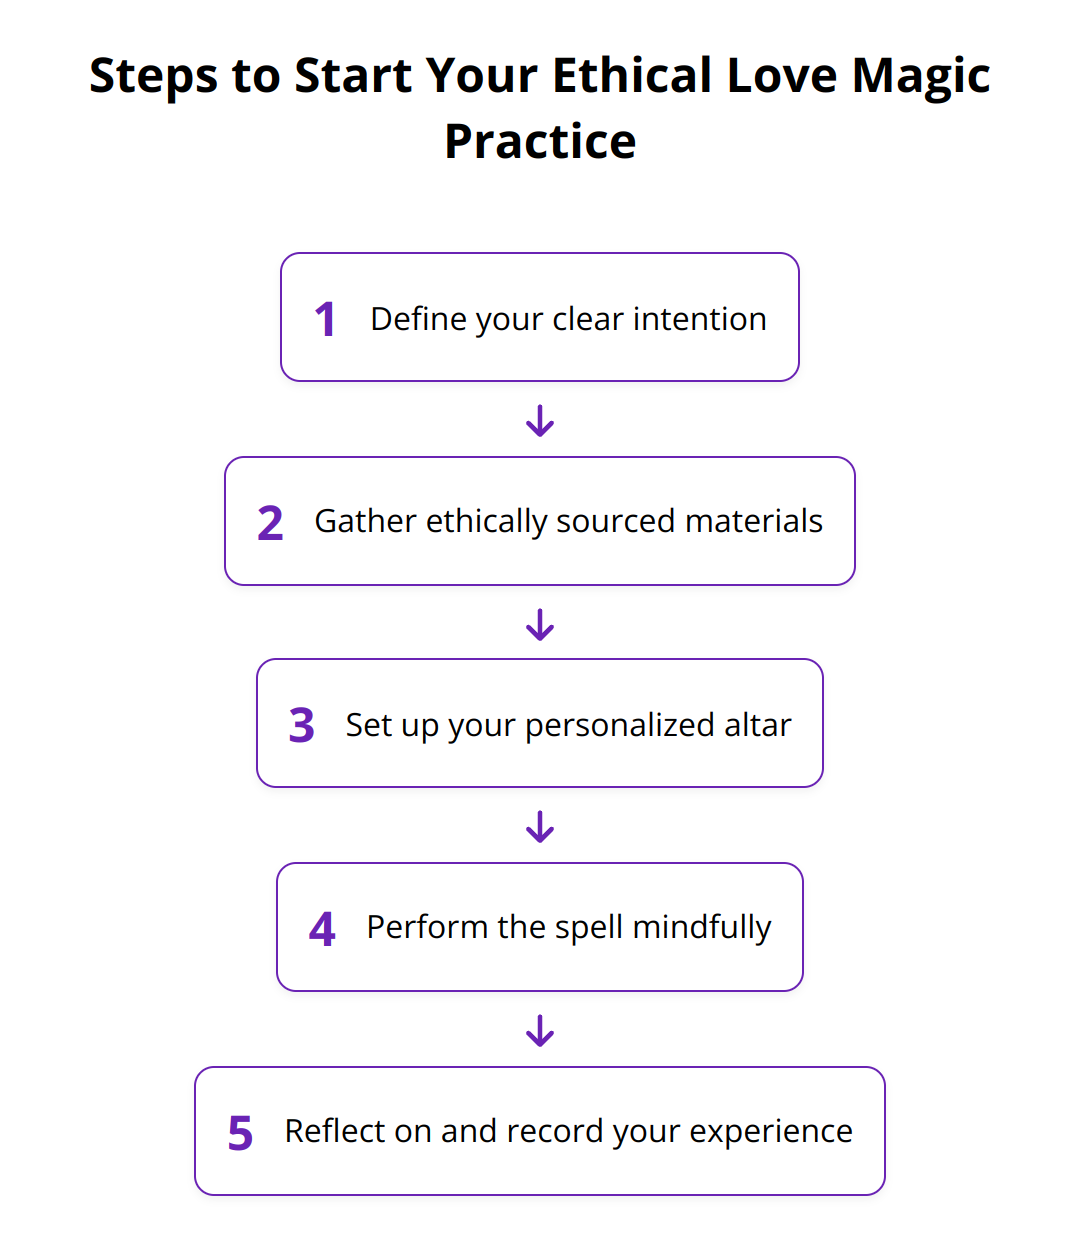 Flow Chart - Steps to Start Your Ethical Love Magic Practice